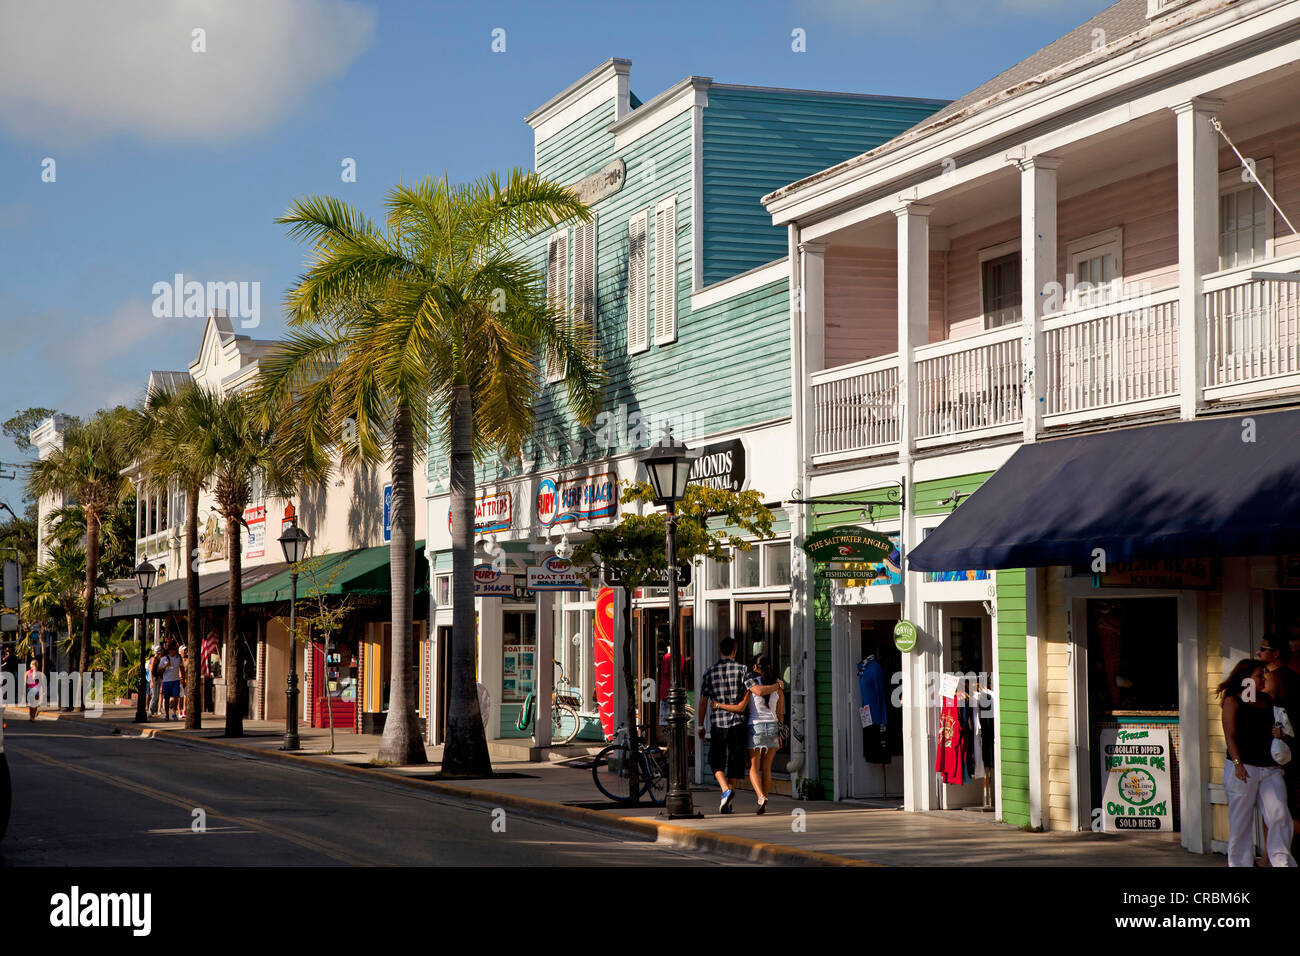 Main street and tourist attractions on Duval Street in Key West, Florida Keys, Florida, USA Stock Photo